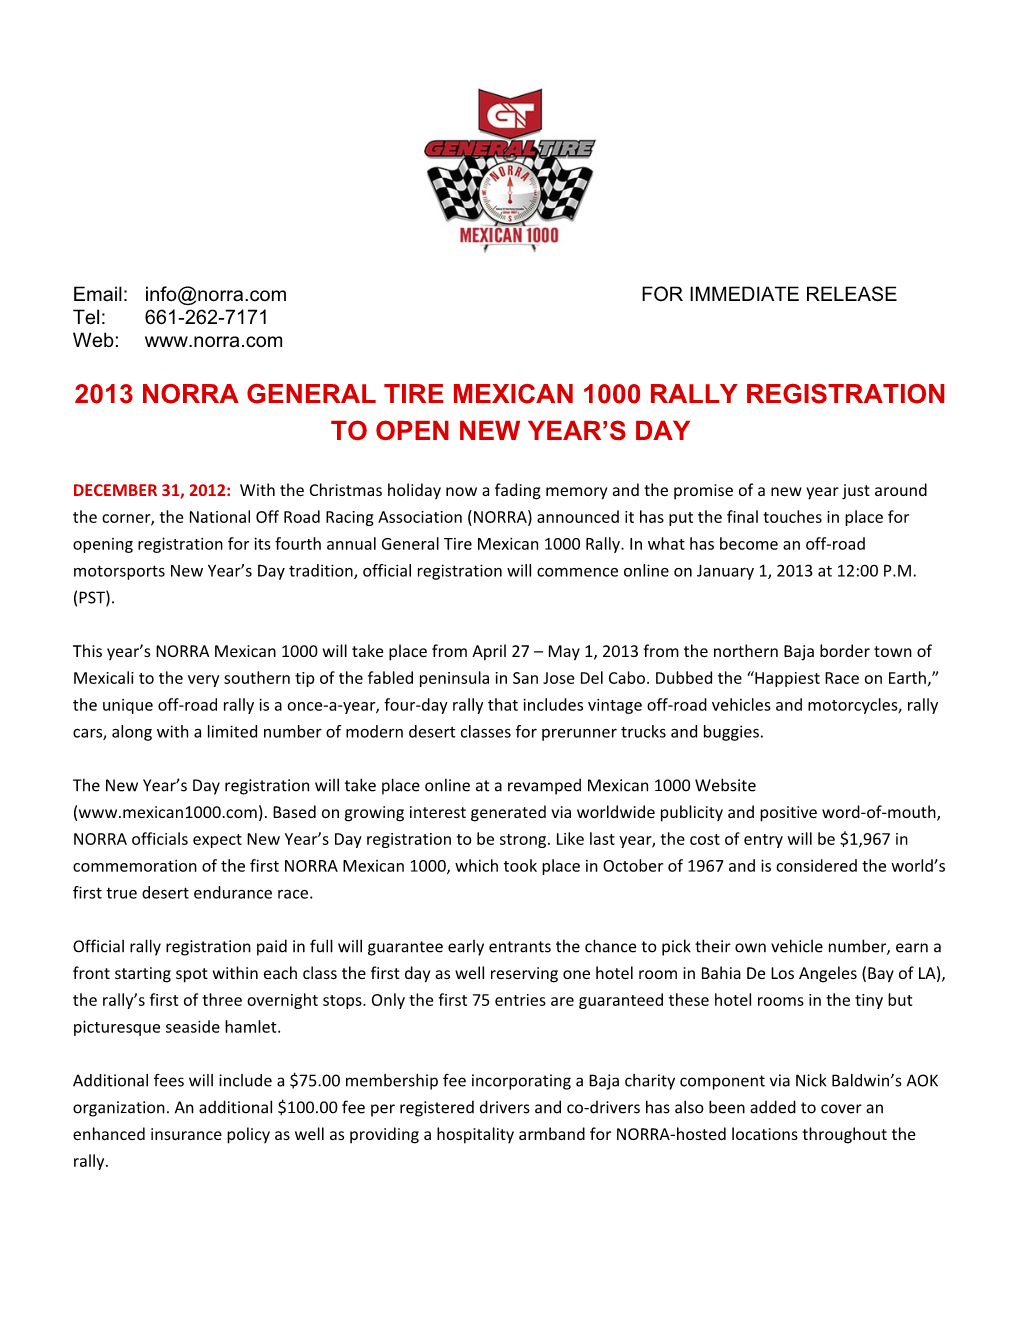 2013 Norra General Tire Mexican 1000 Rally Registration